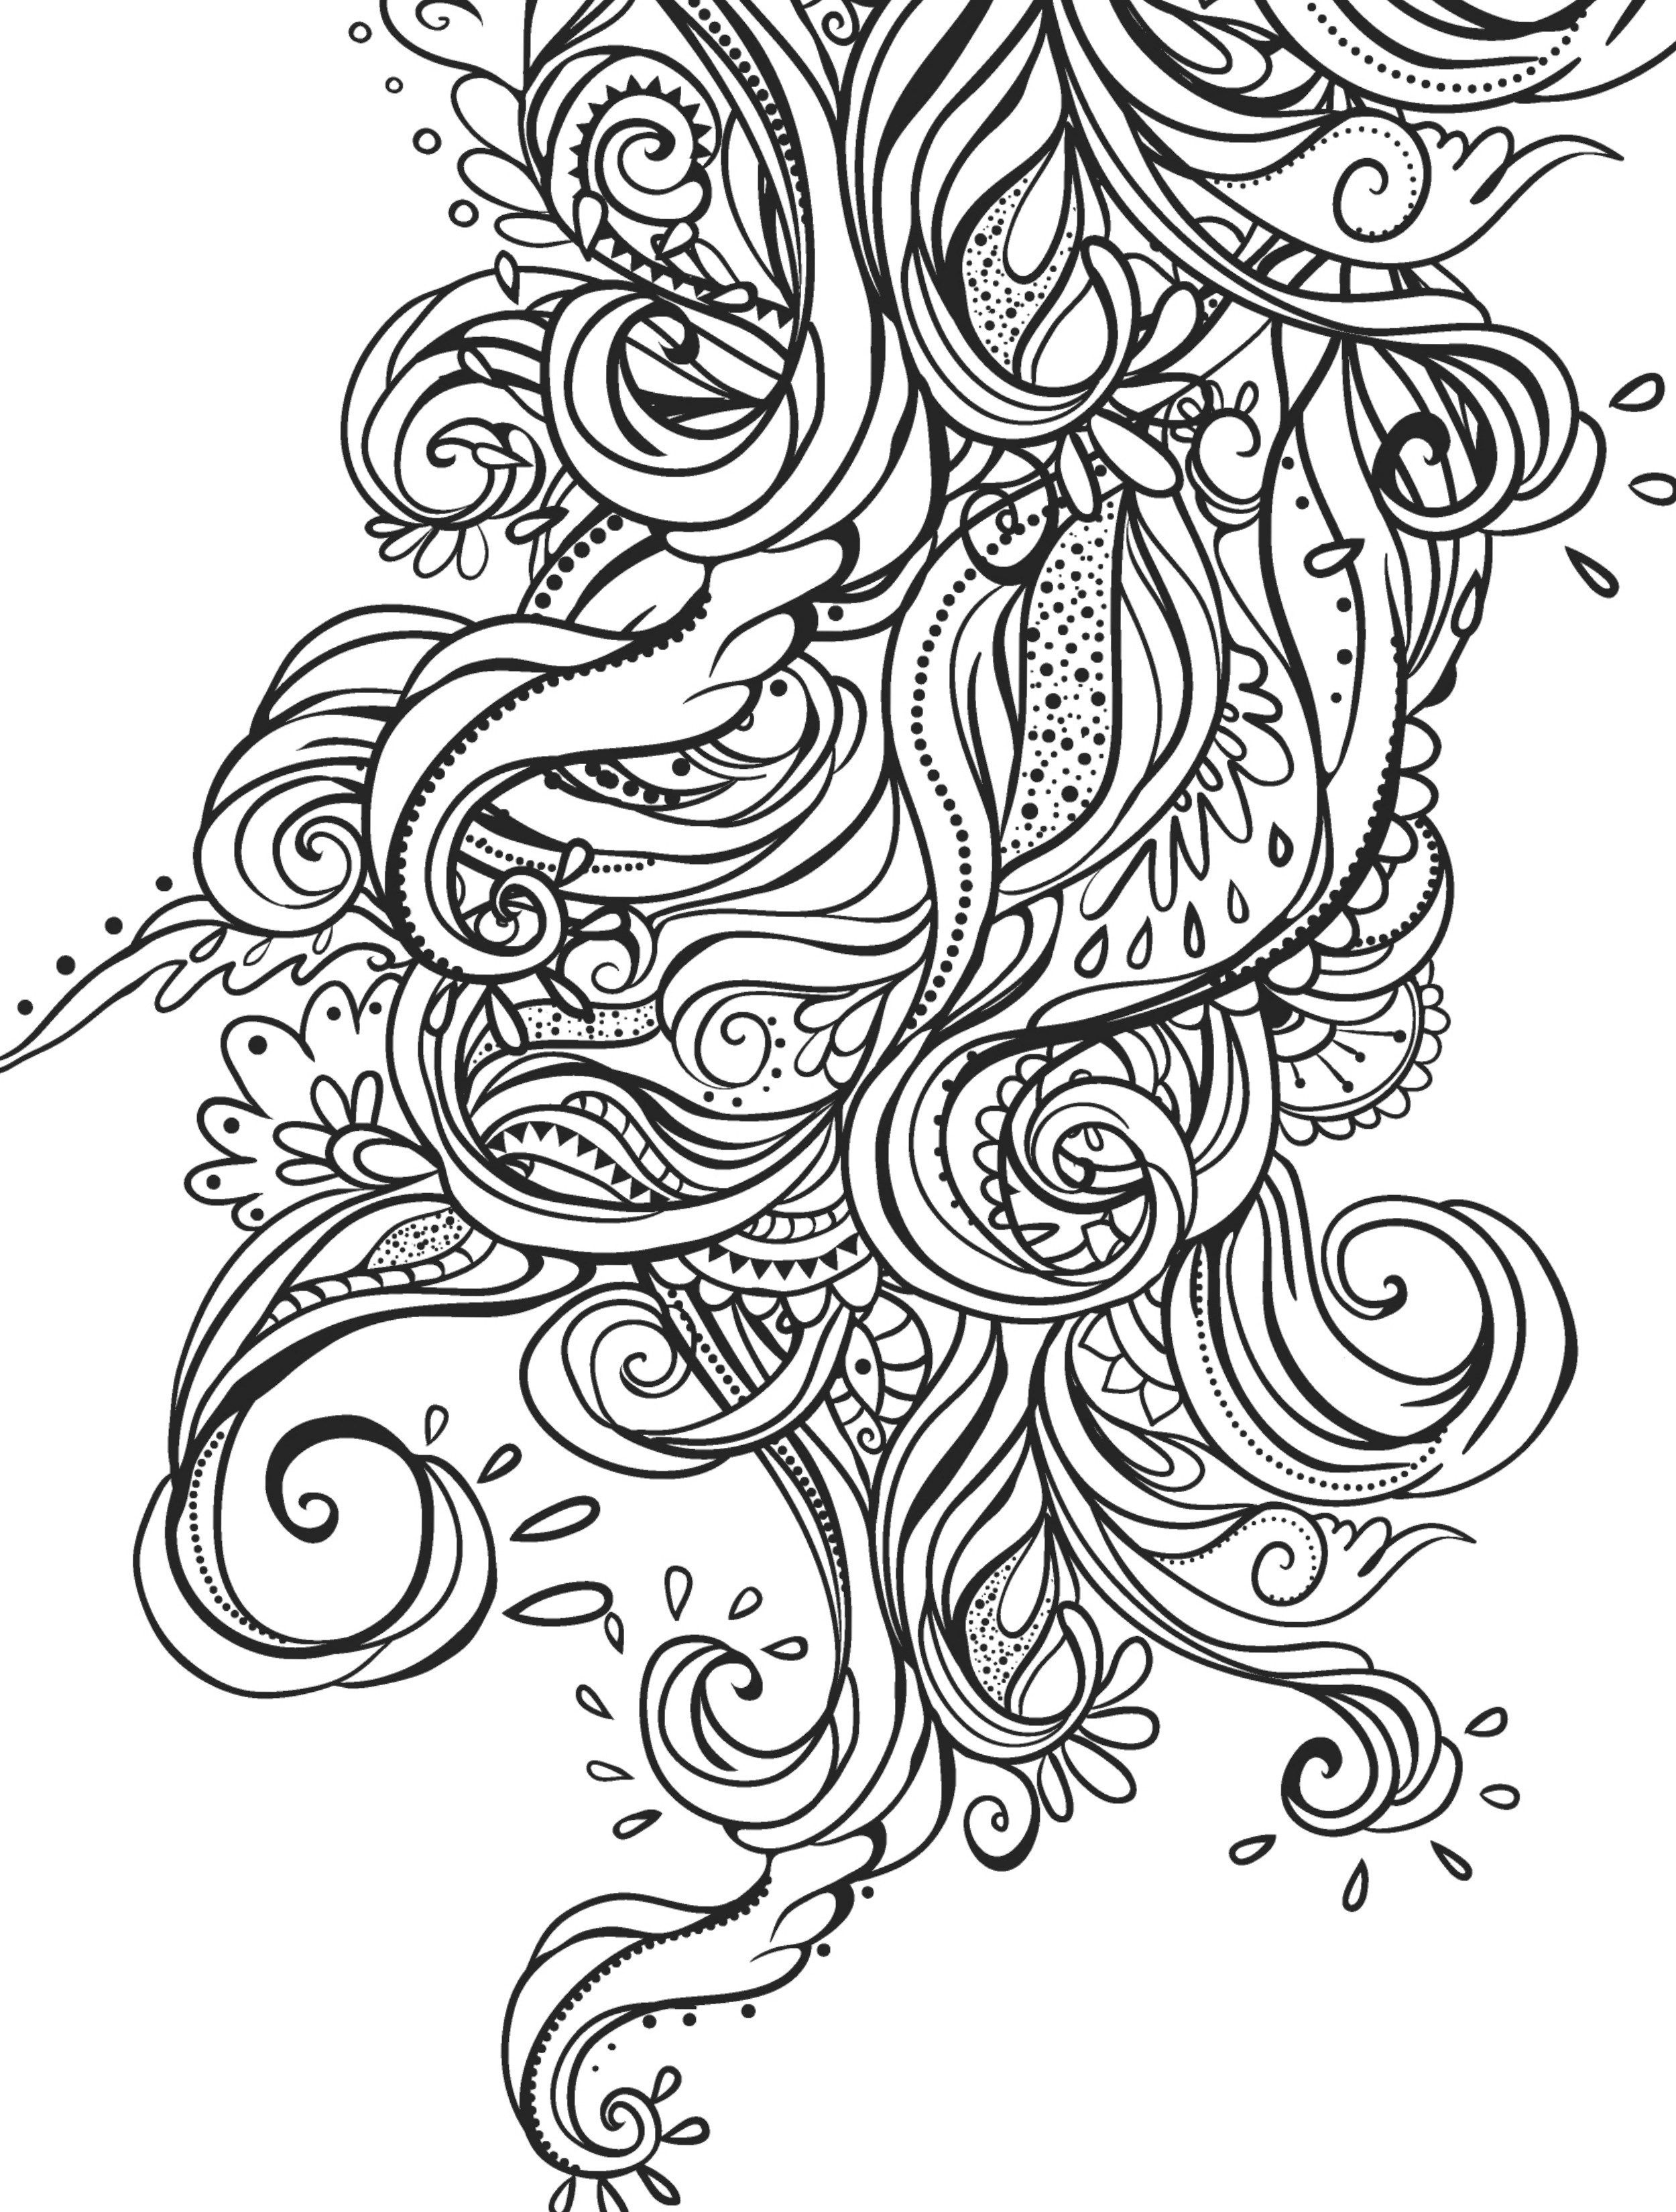 Beautiful Coloring Pages Free To Upload | Color My World | Adult - Free Printable Coloring Designs For Adults